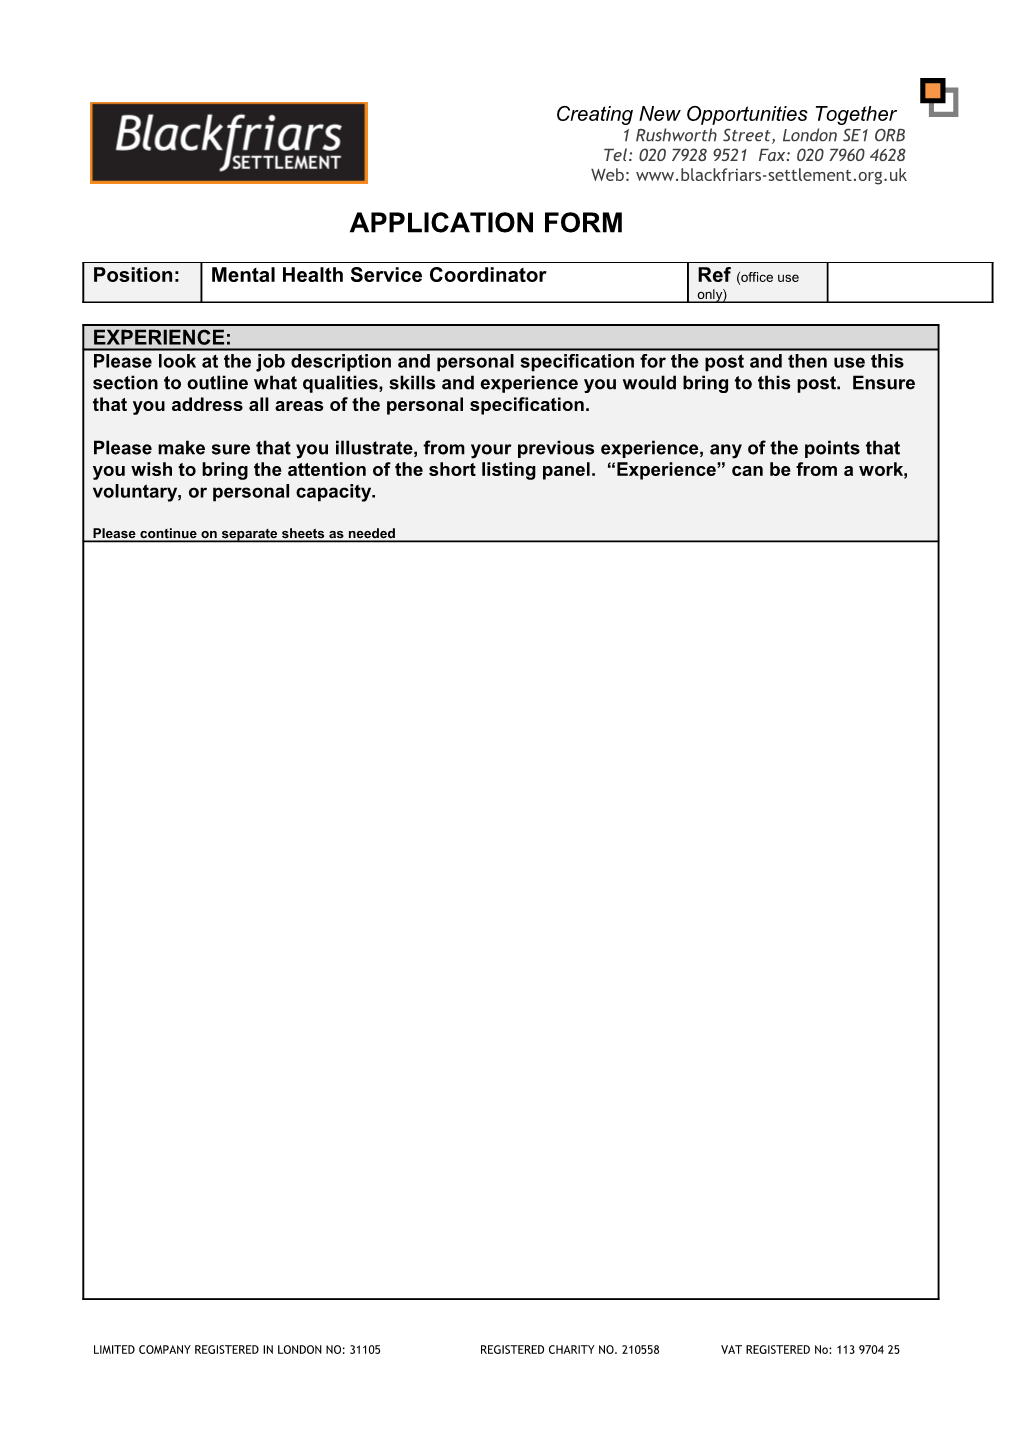 Application Form s18